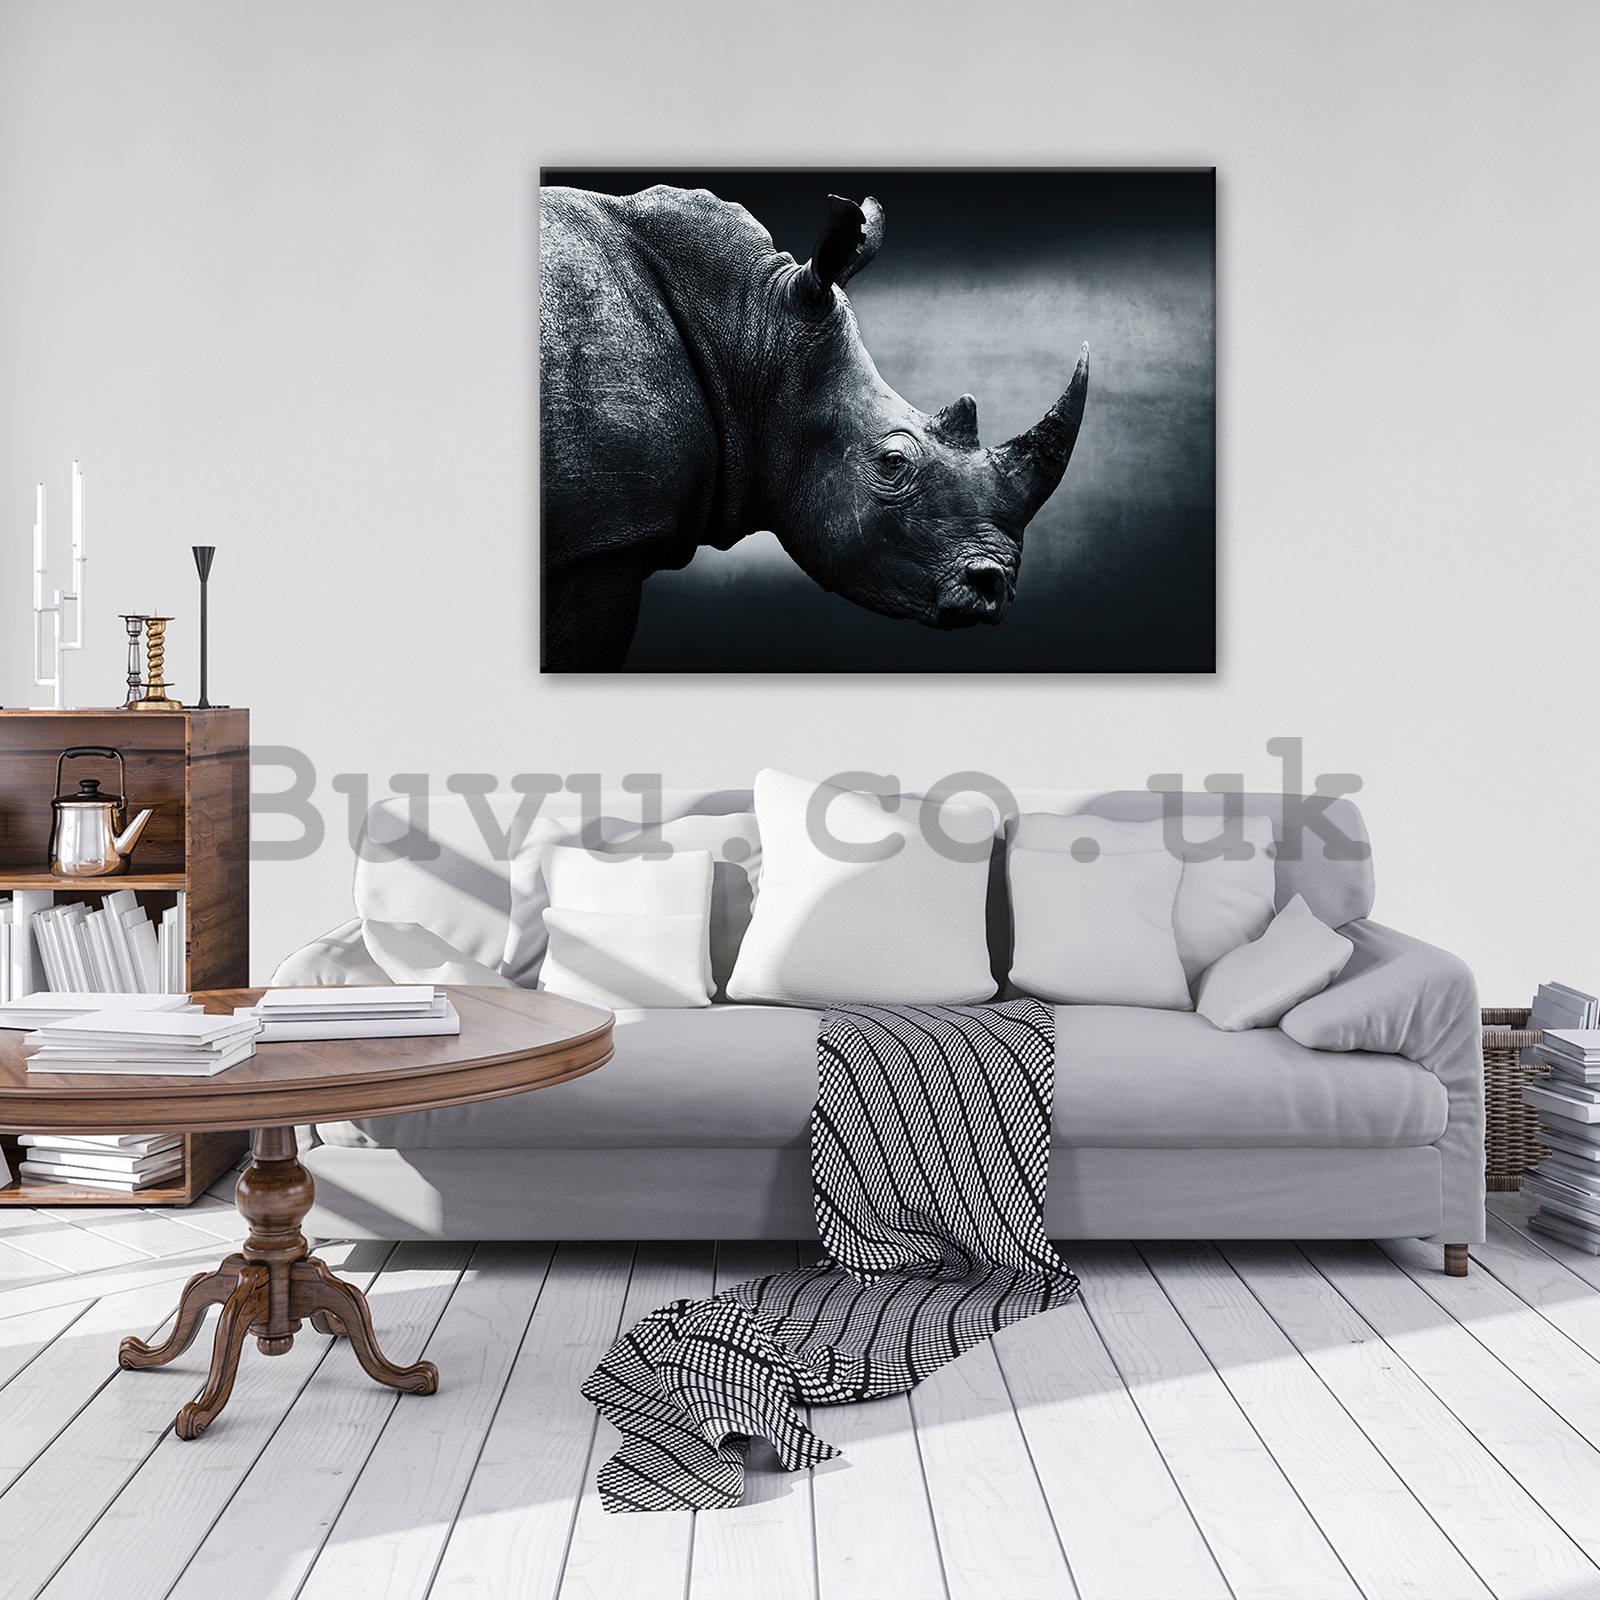 Painting on canvas: Rhino (black and white) - 80x60 cm